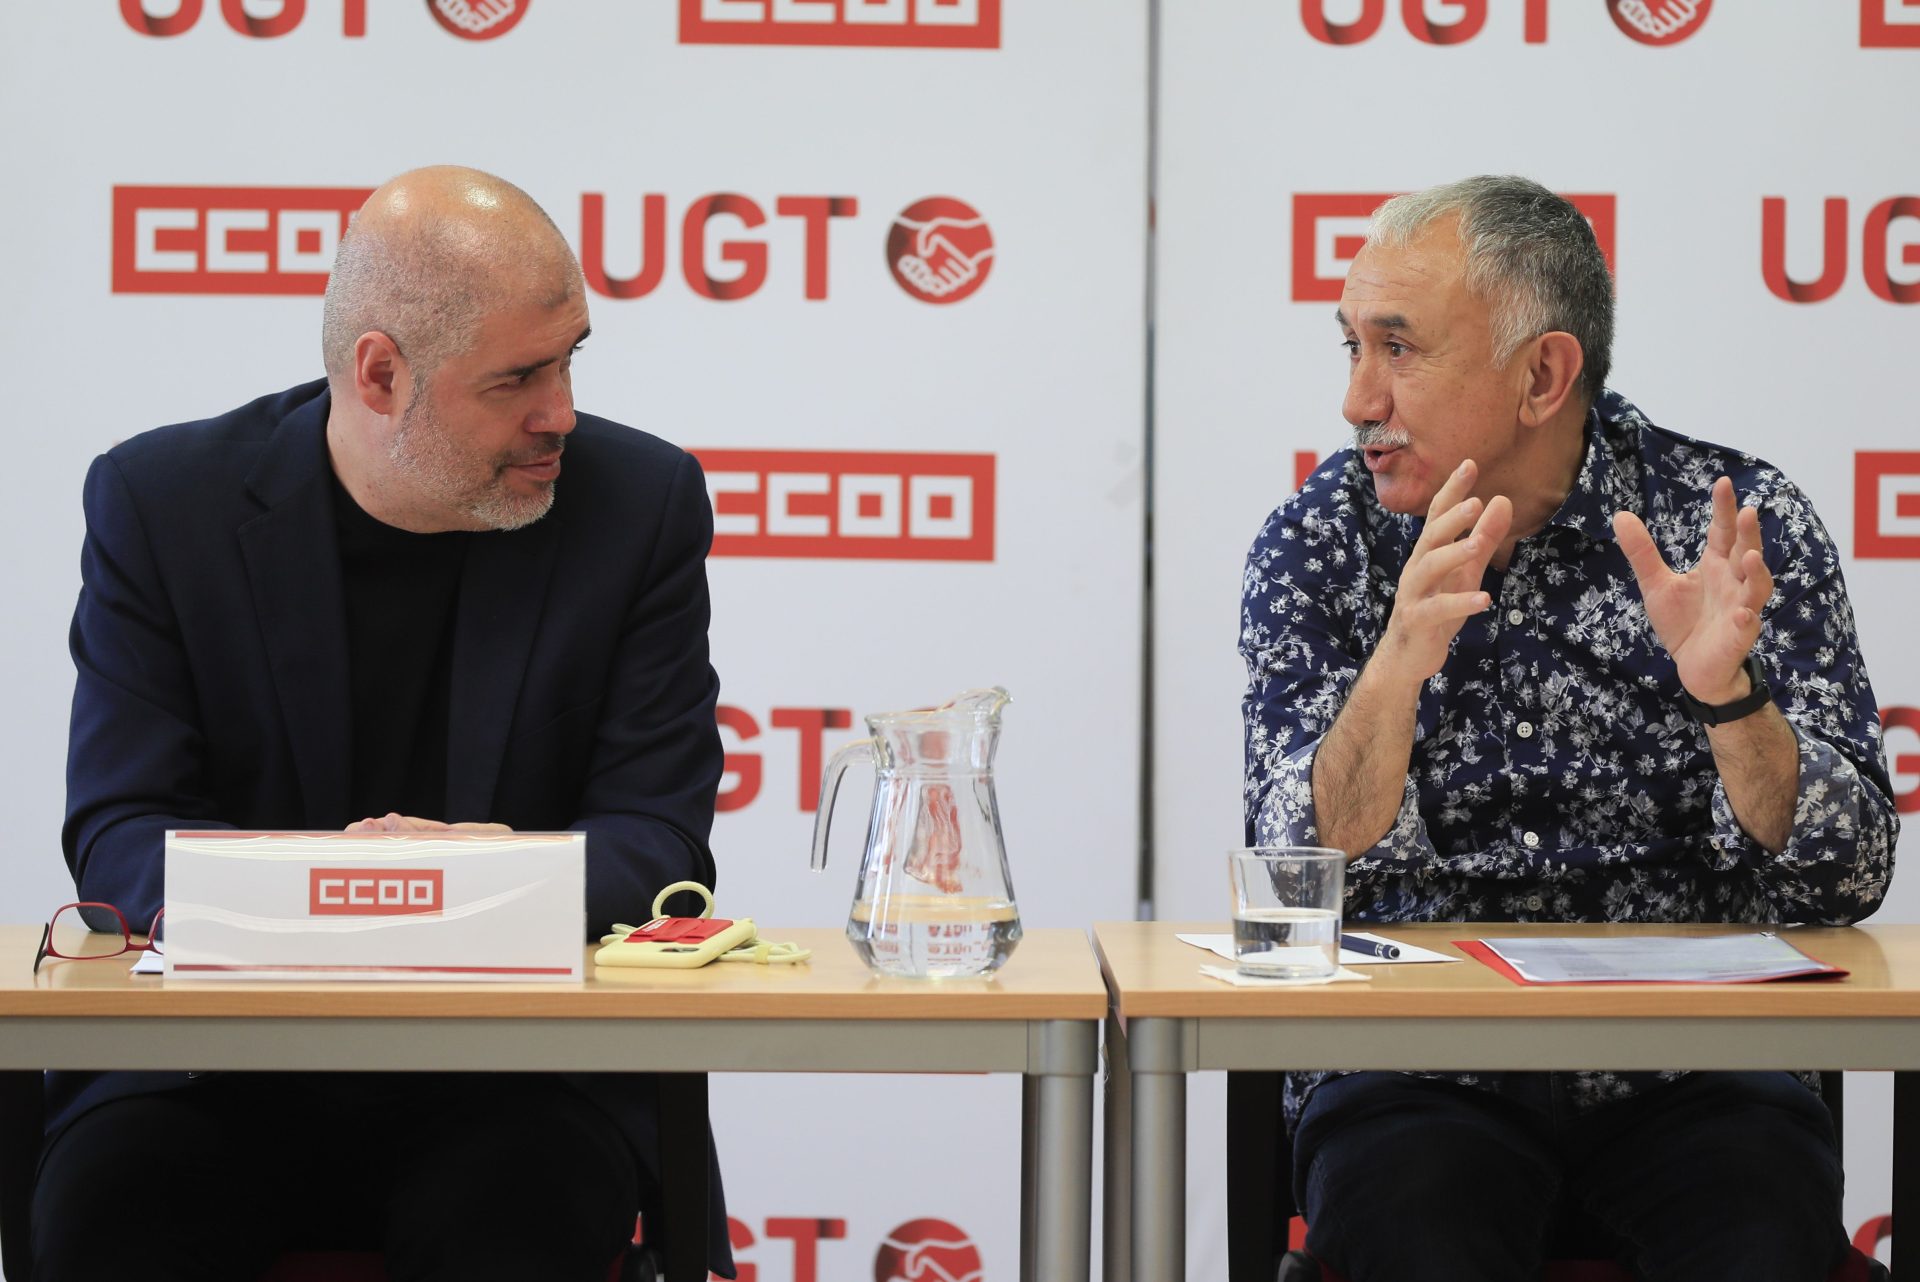 The general secretaries of the UGT and CCOO